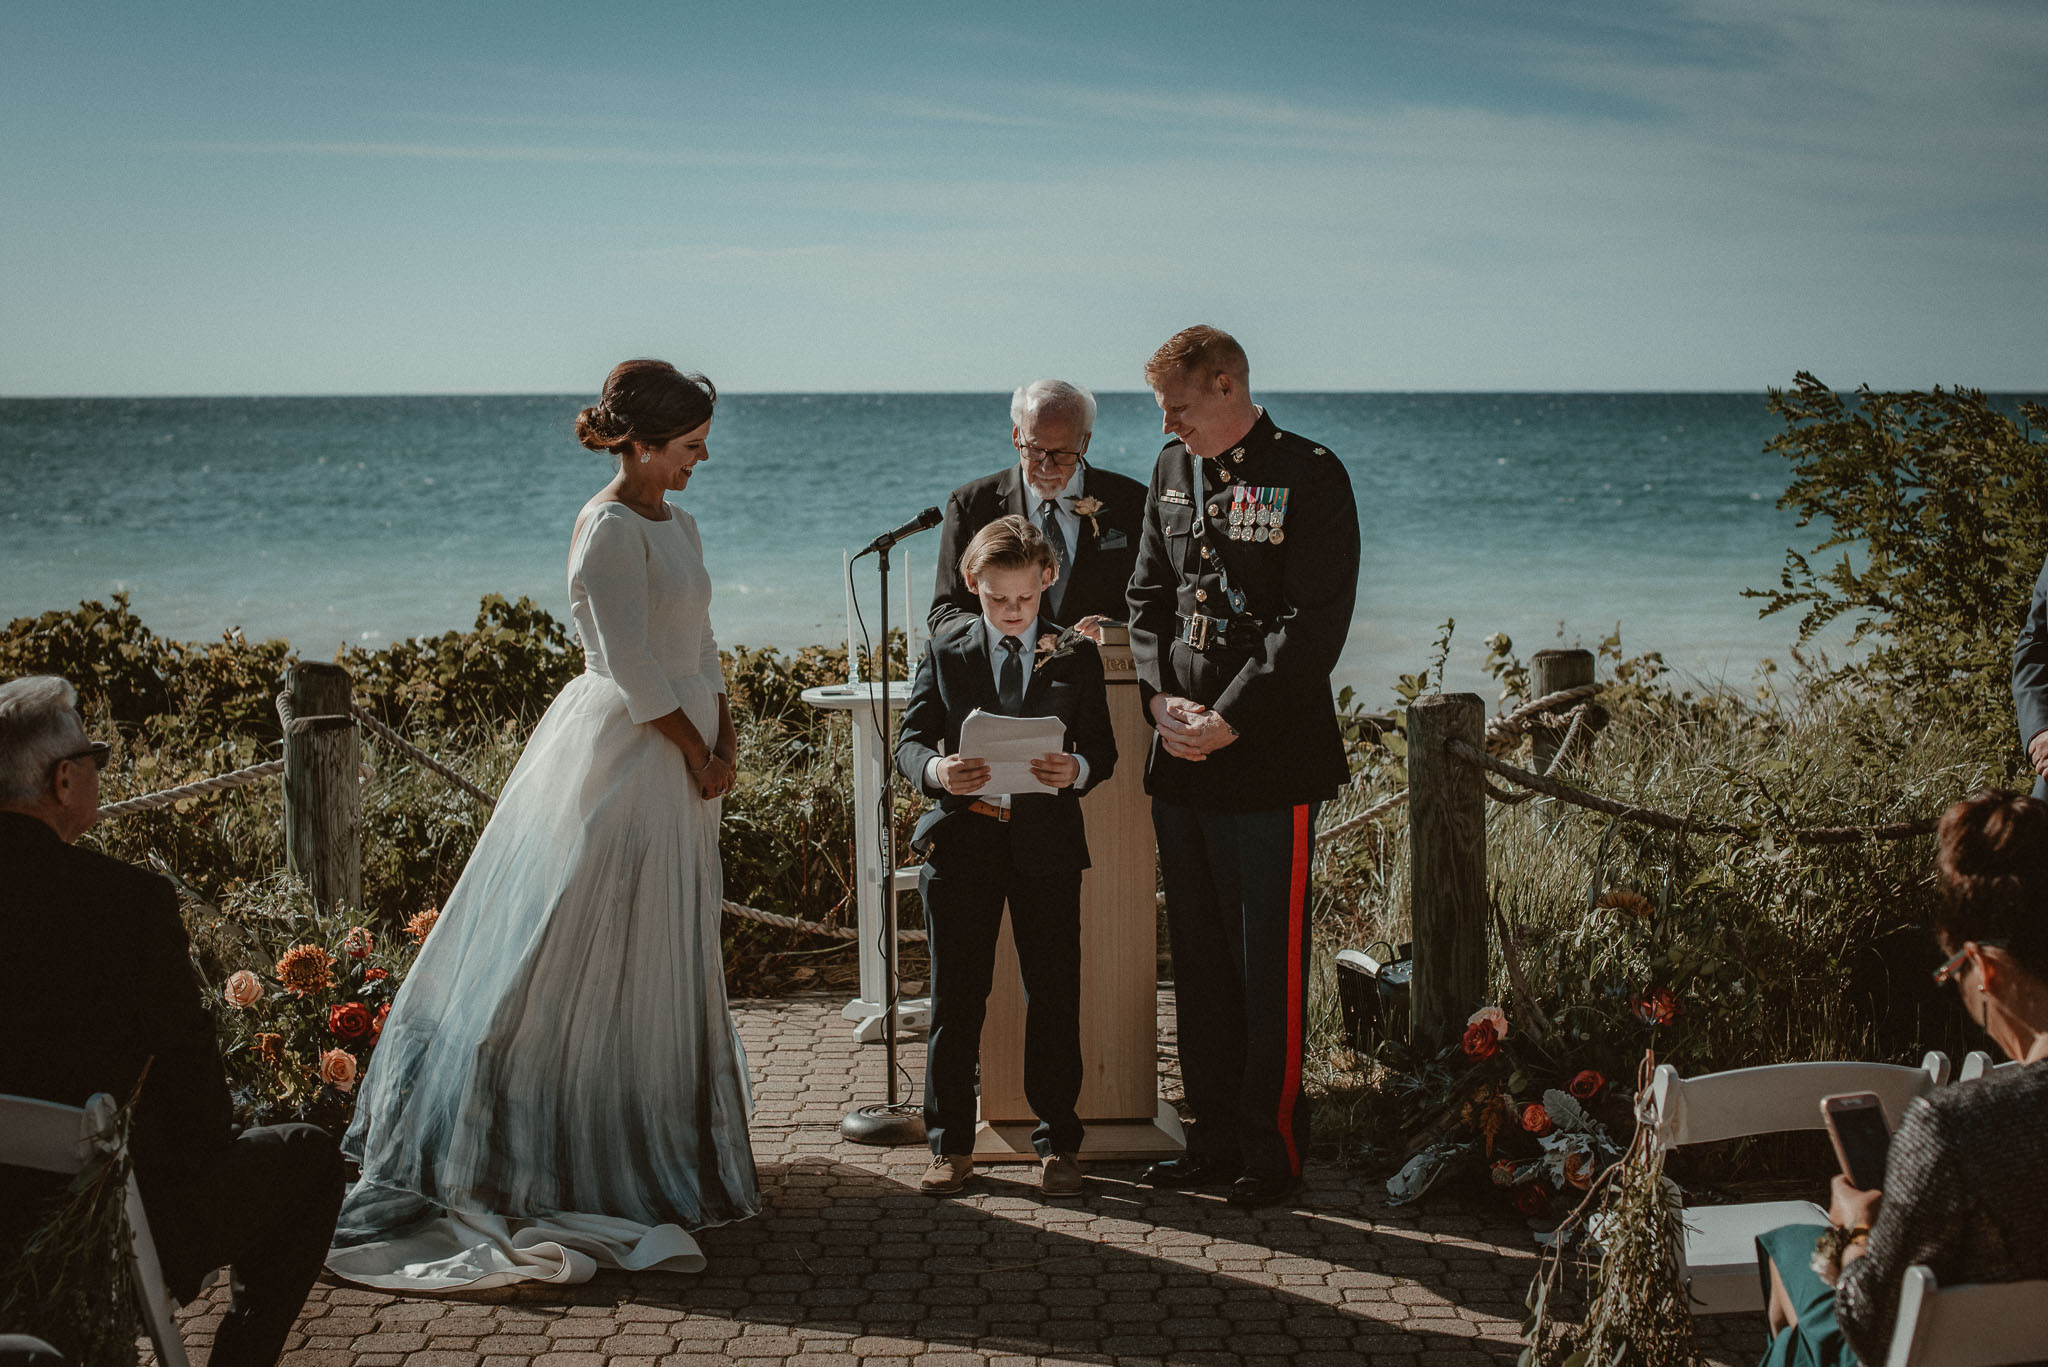 The groom's son standing between the couple as he reads a special message to his dad and future step mom. 